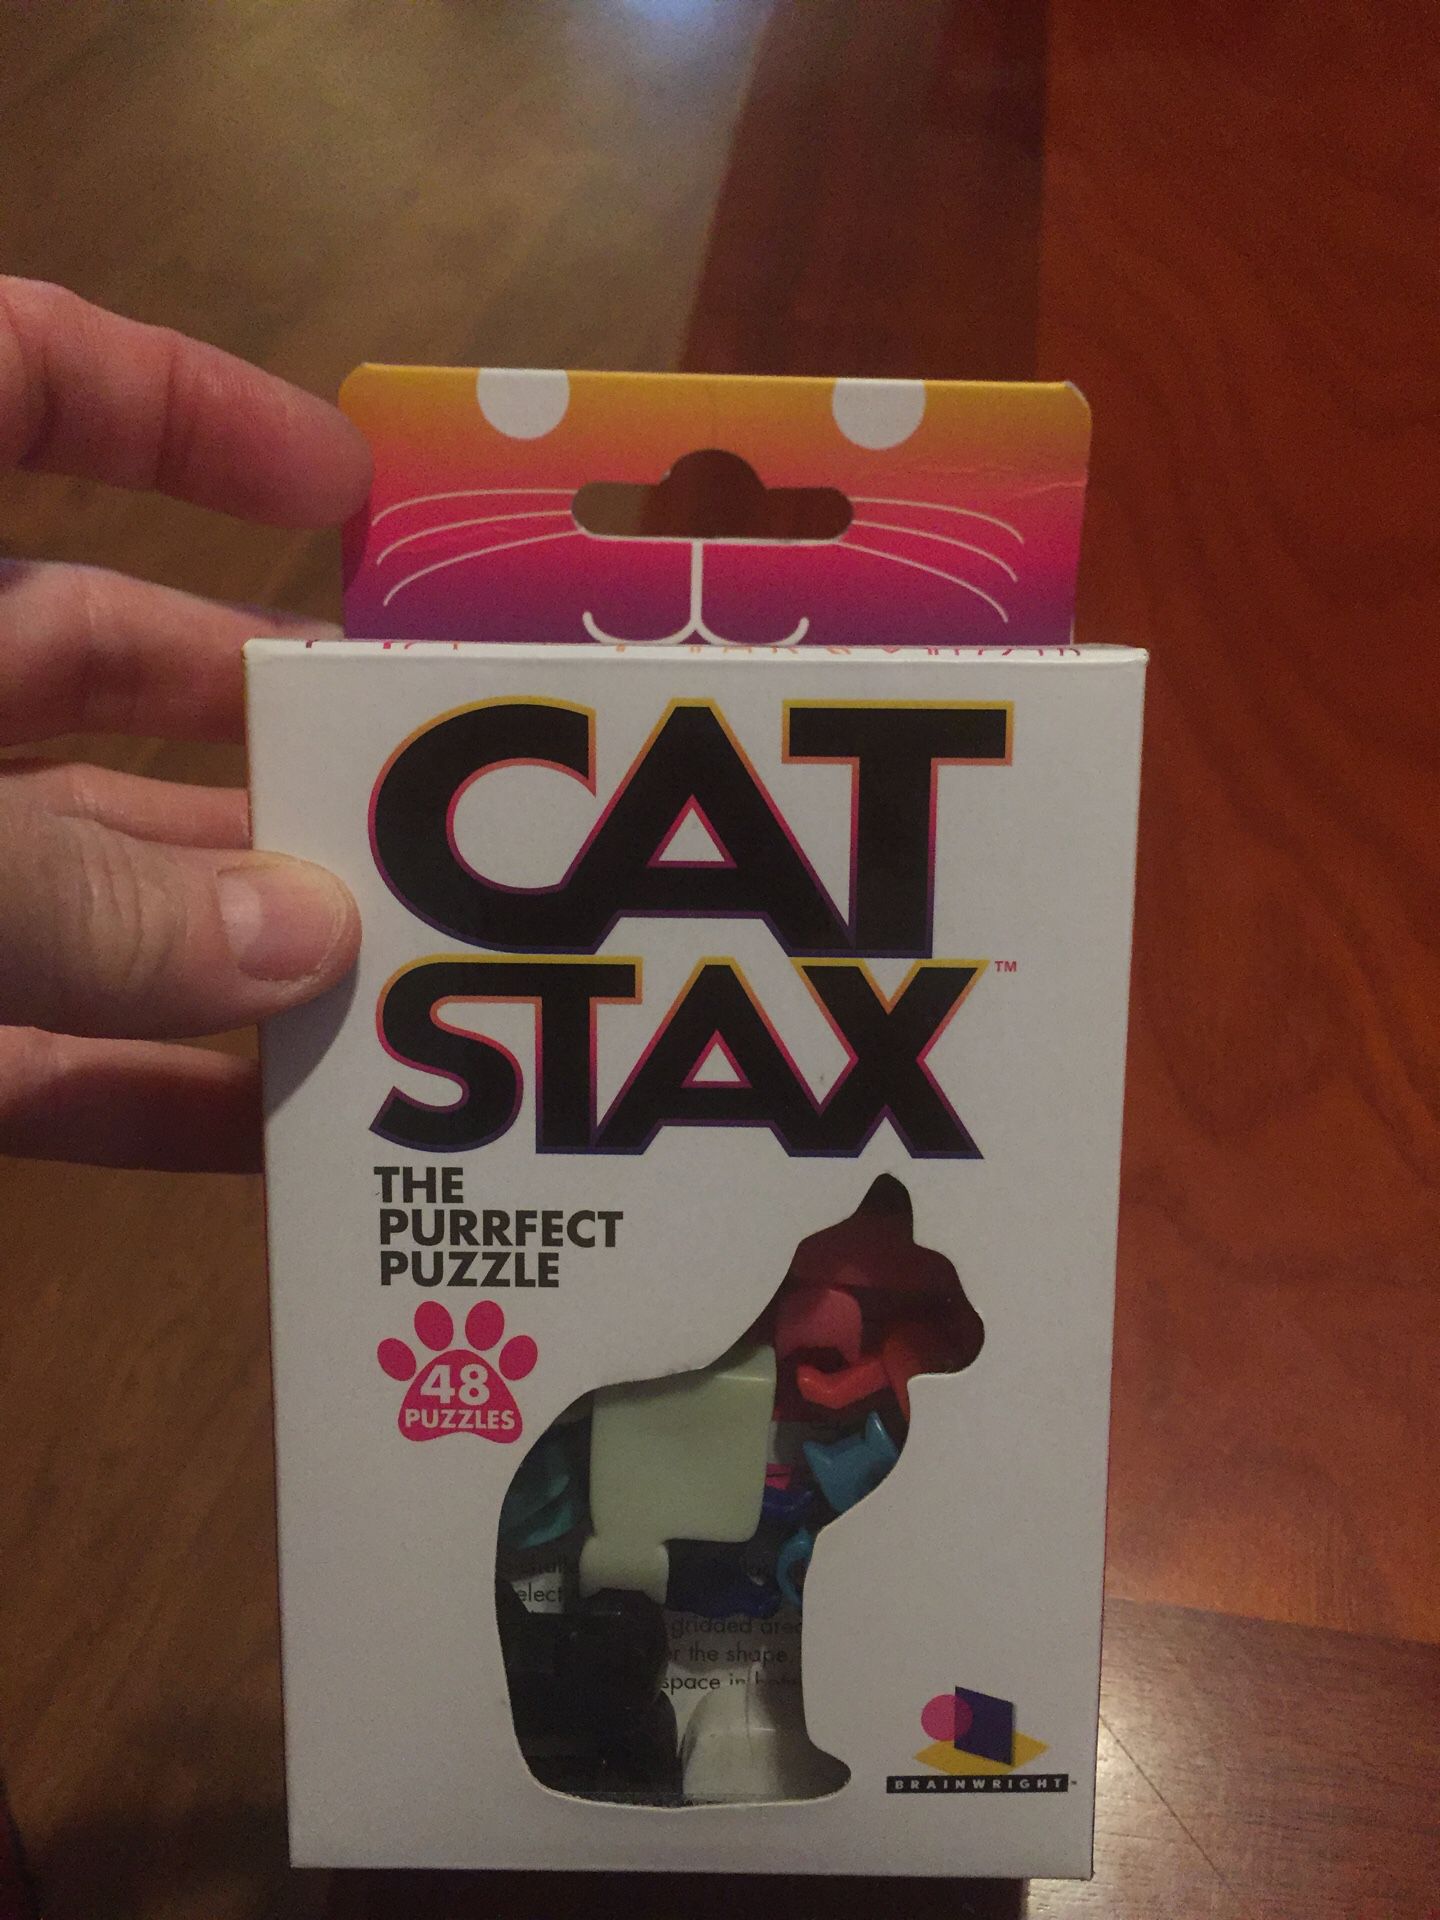 Unused Cat Stax the purrfect puzzle travel case +12 cats +48 challenge cards